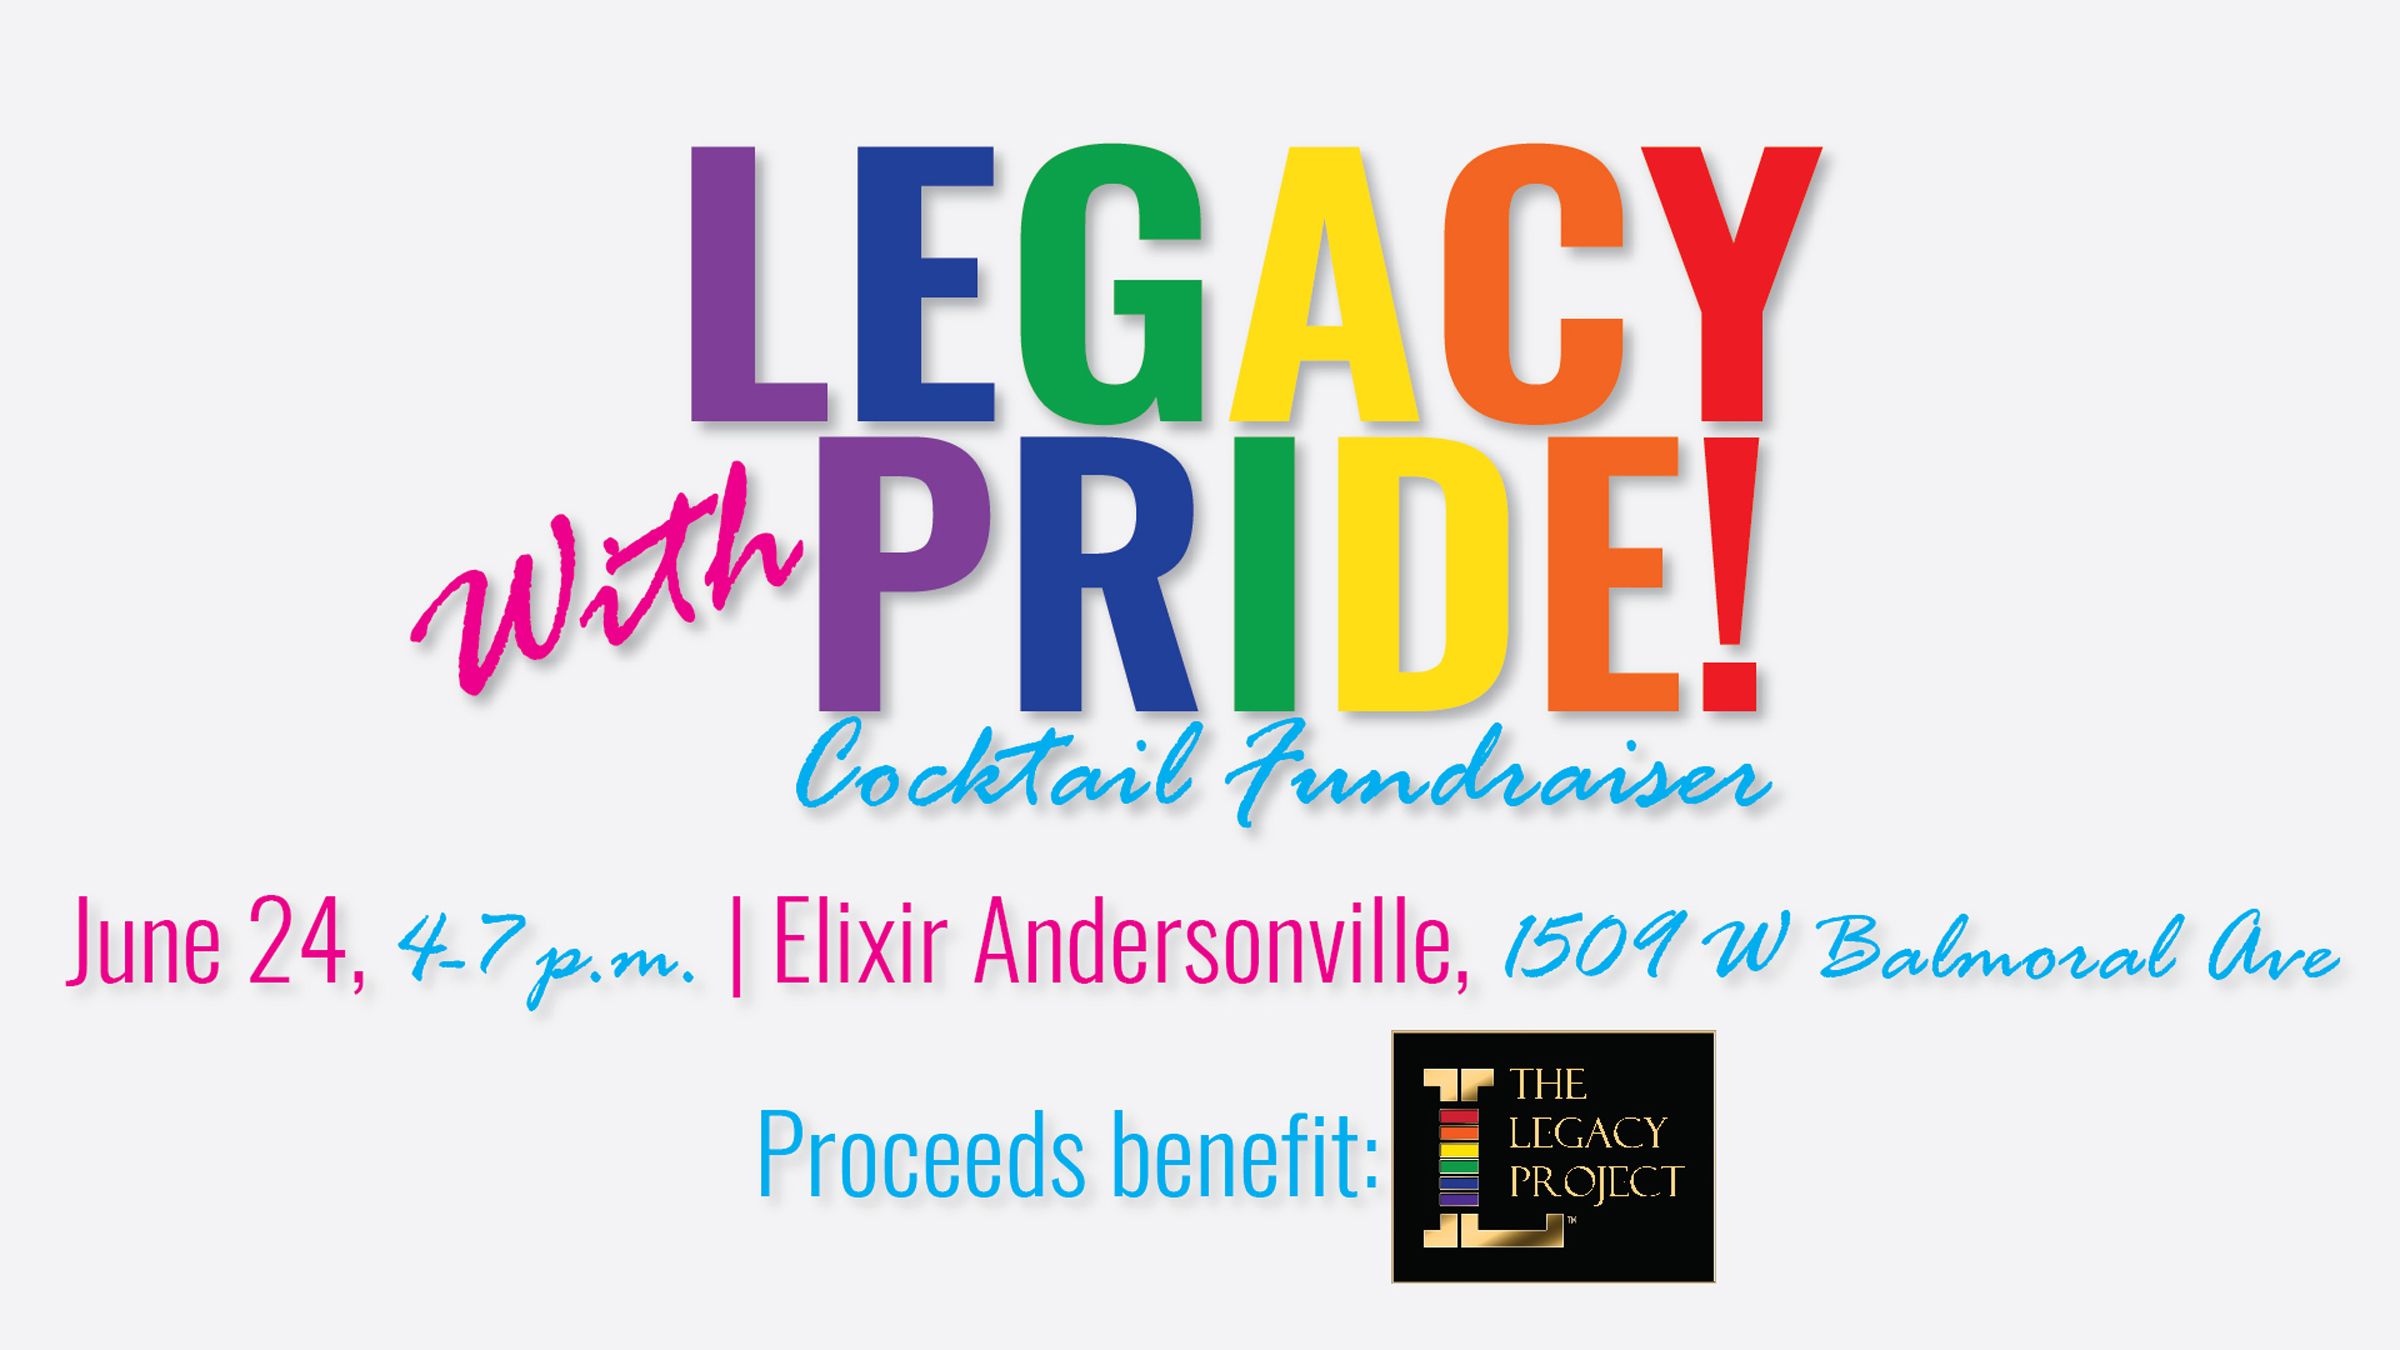 LEGACY PROJECT PRESENTS Legacy With Pride Cocktail Fundraiser at Elixir Andersonville 2017